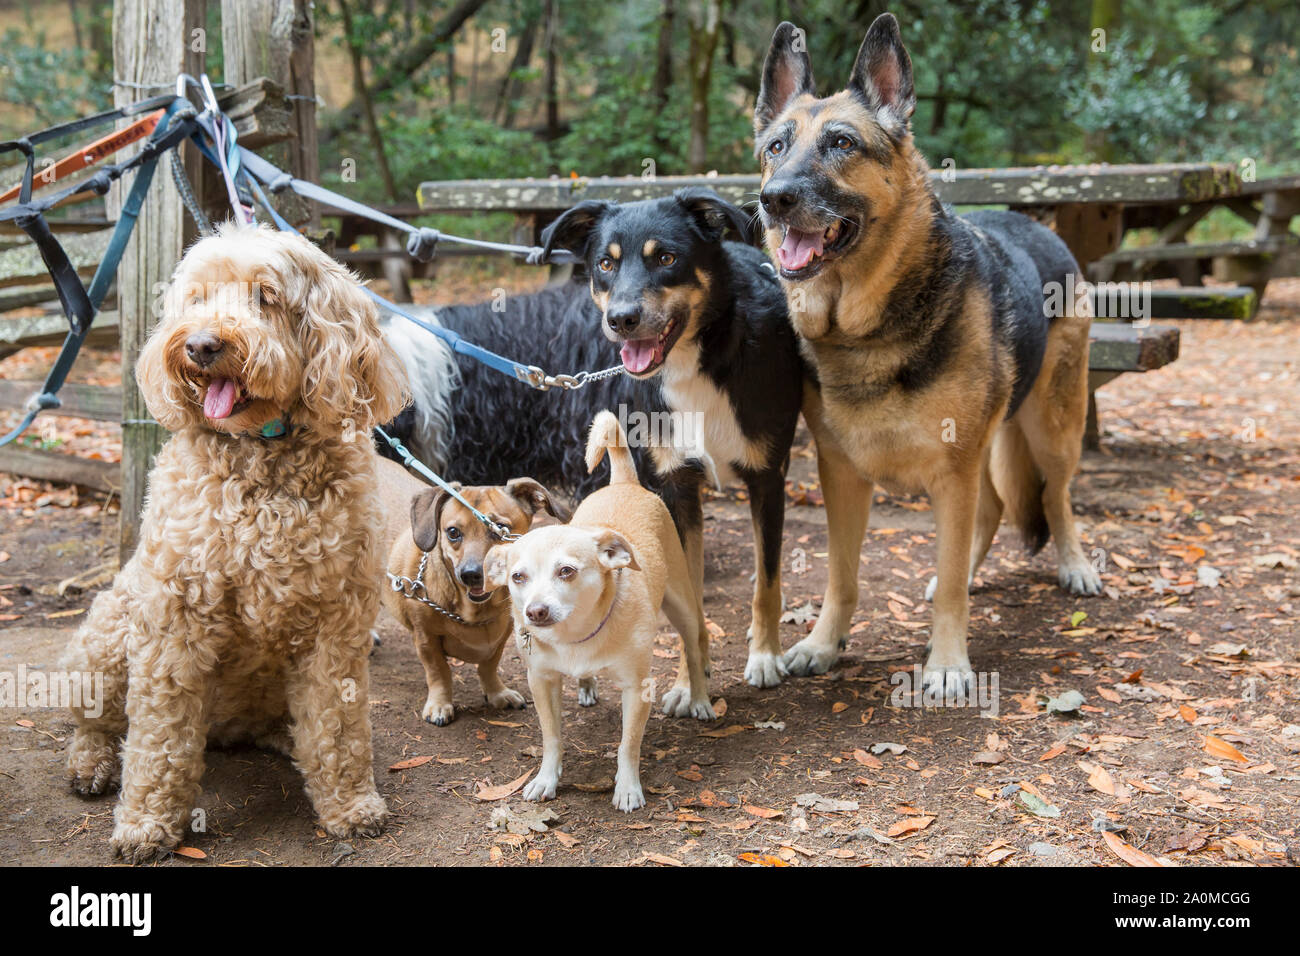 Dogs on leash waiting eagerly for their handler. Stock Photo